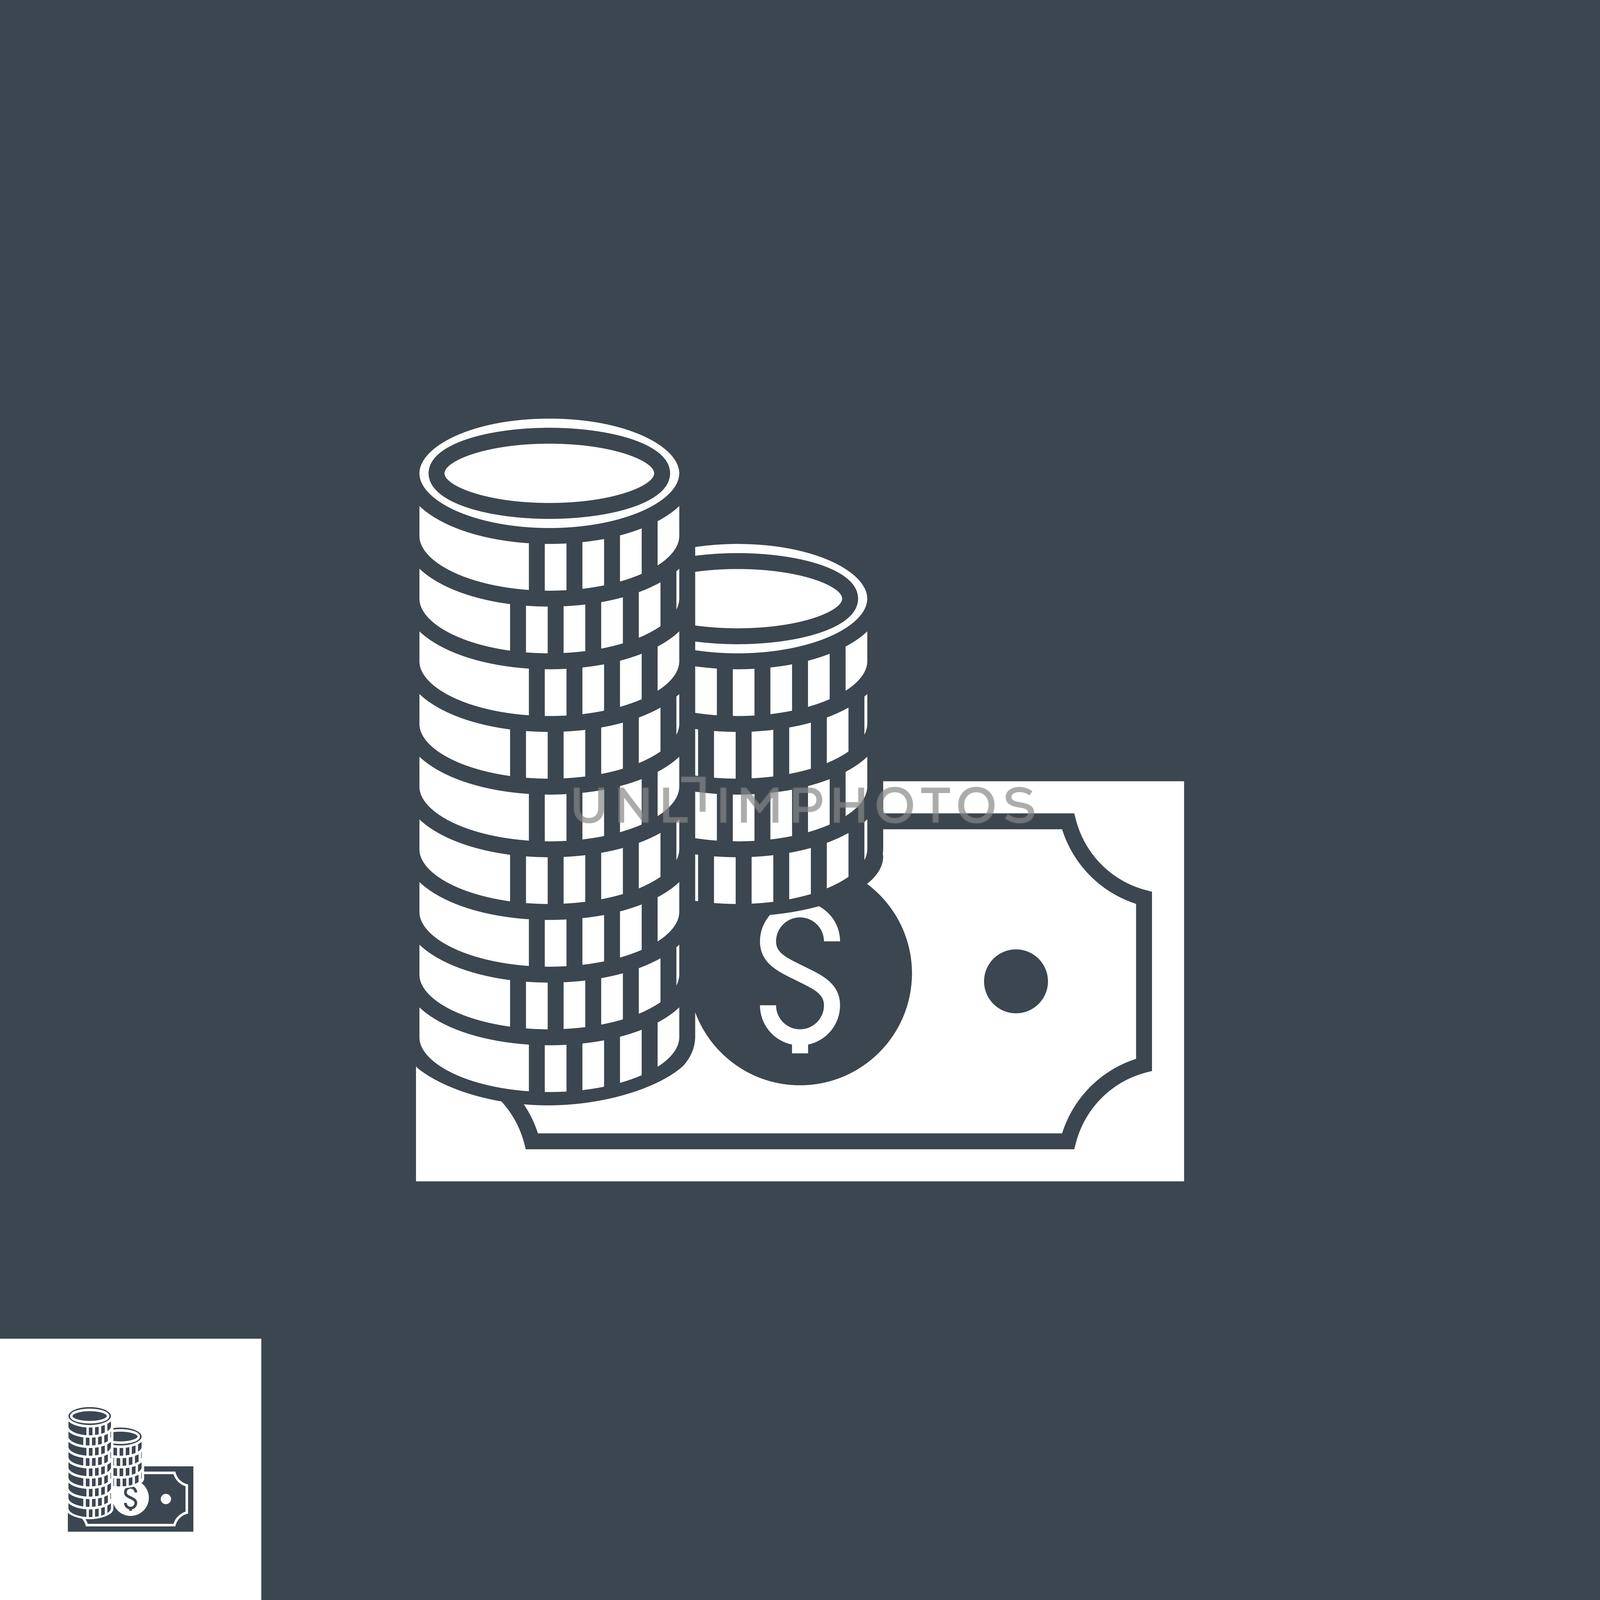 Salary related vector glyph icon. Isolated on black background. Vector illustration.